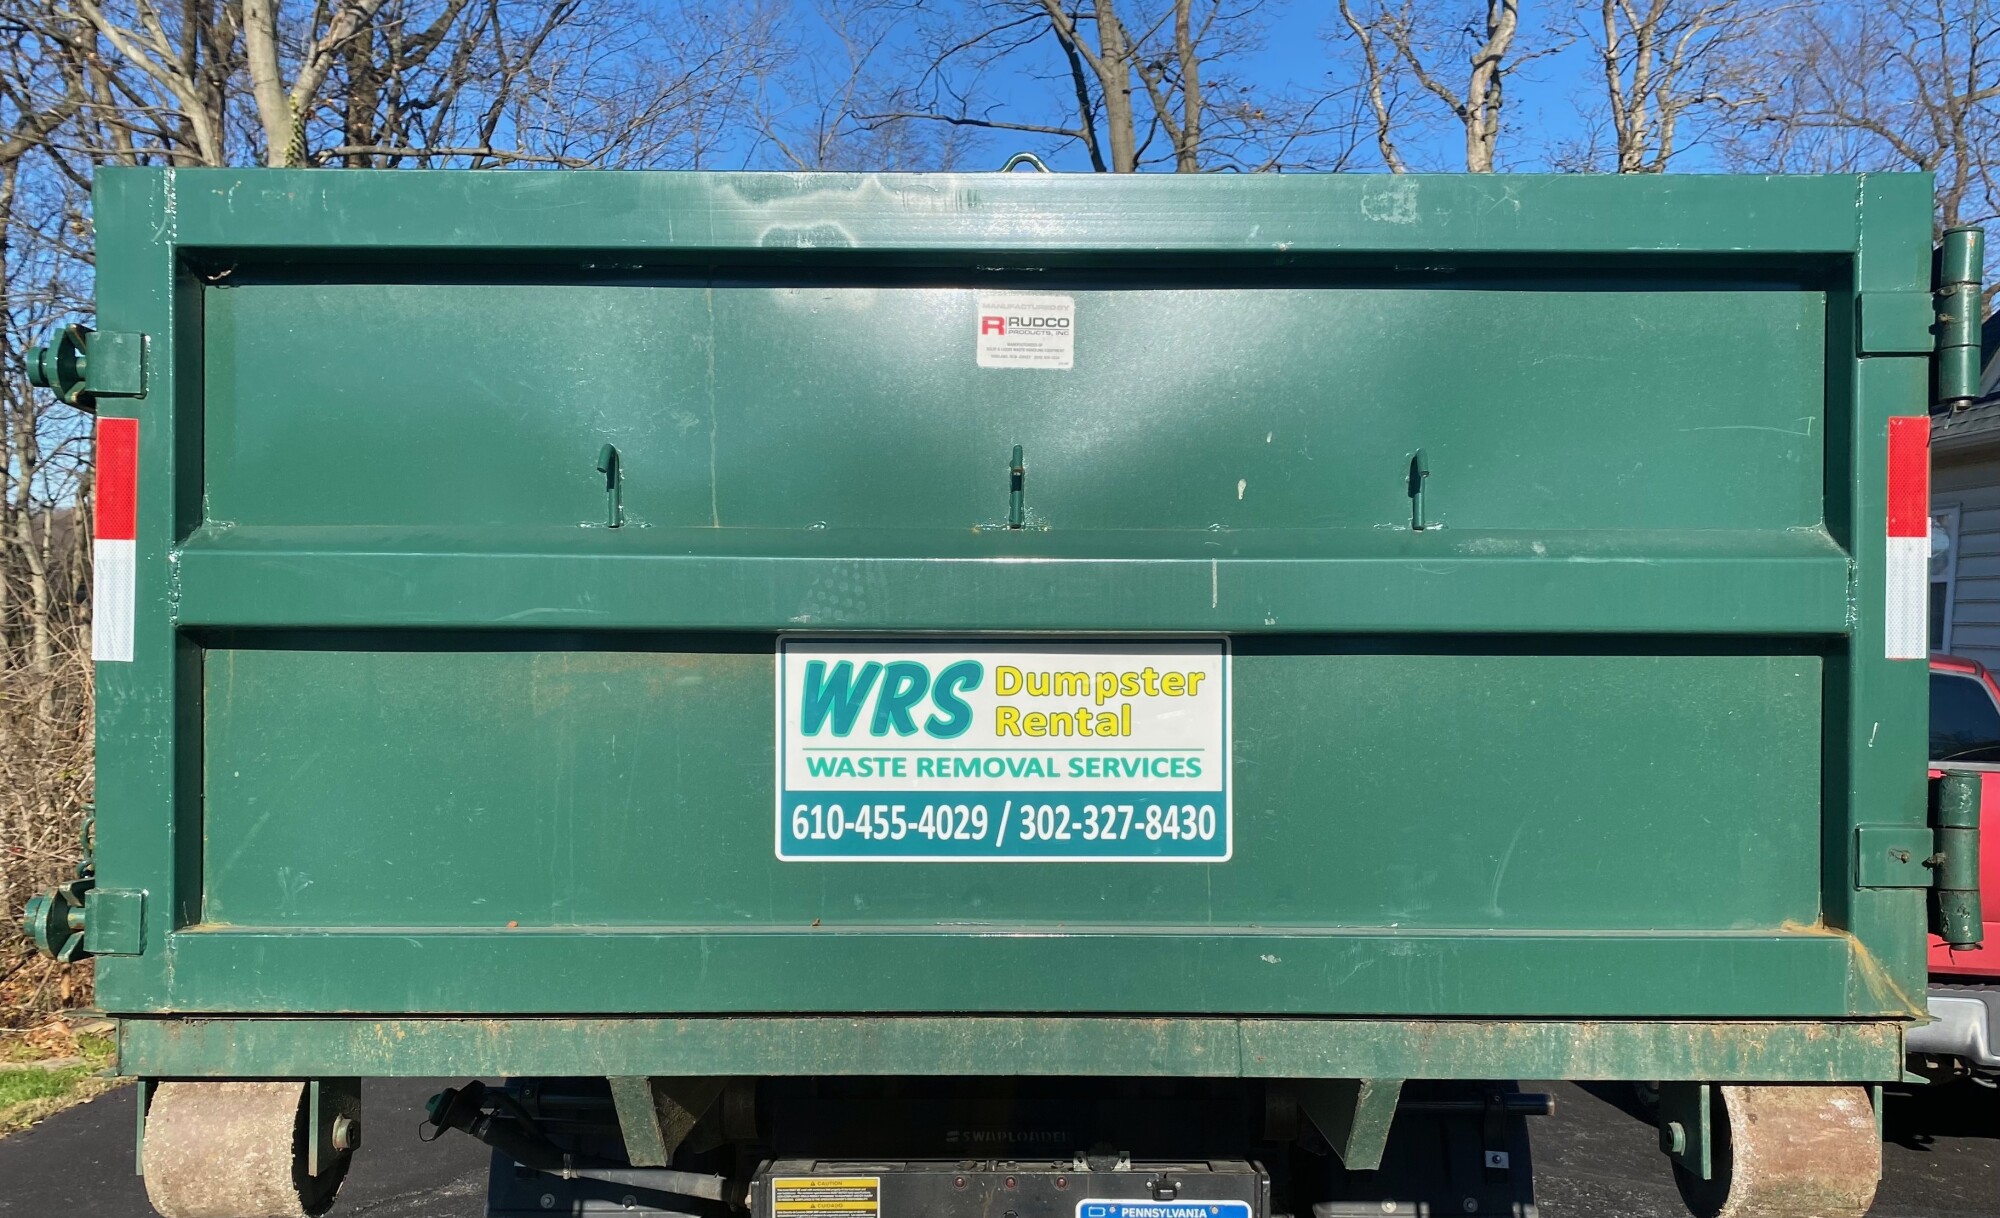 Dumpster Rentals in London Grove, PA